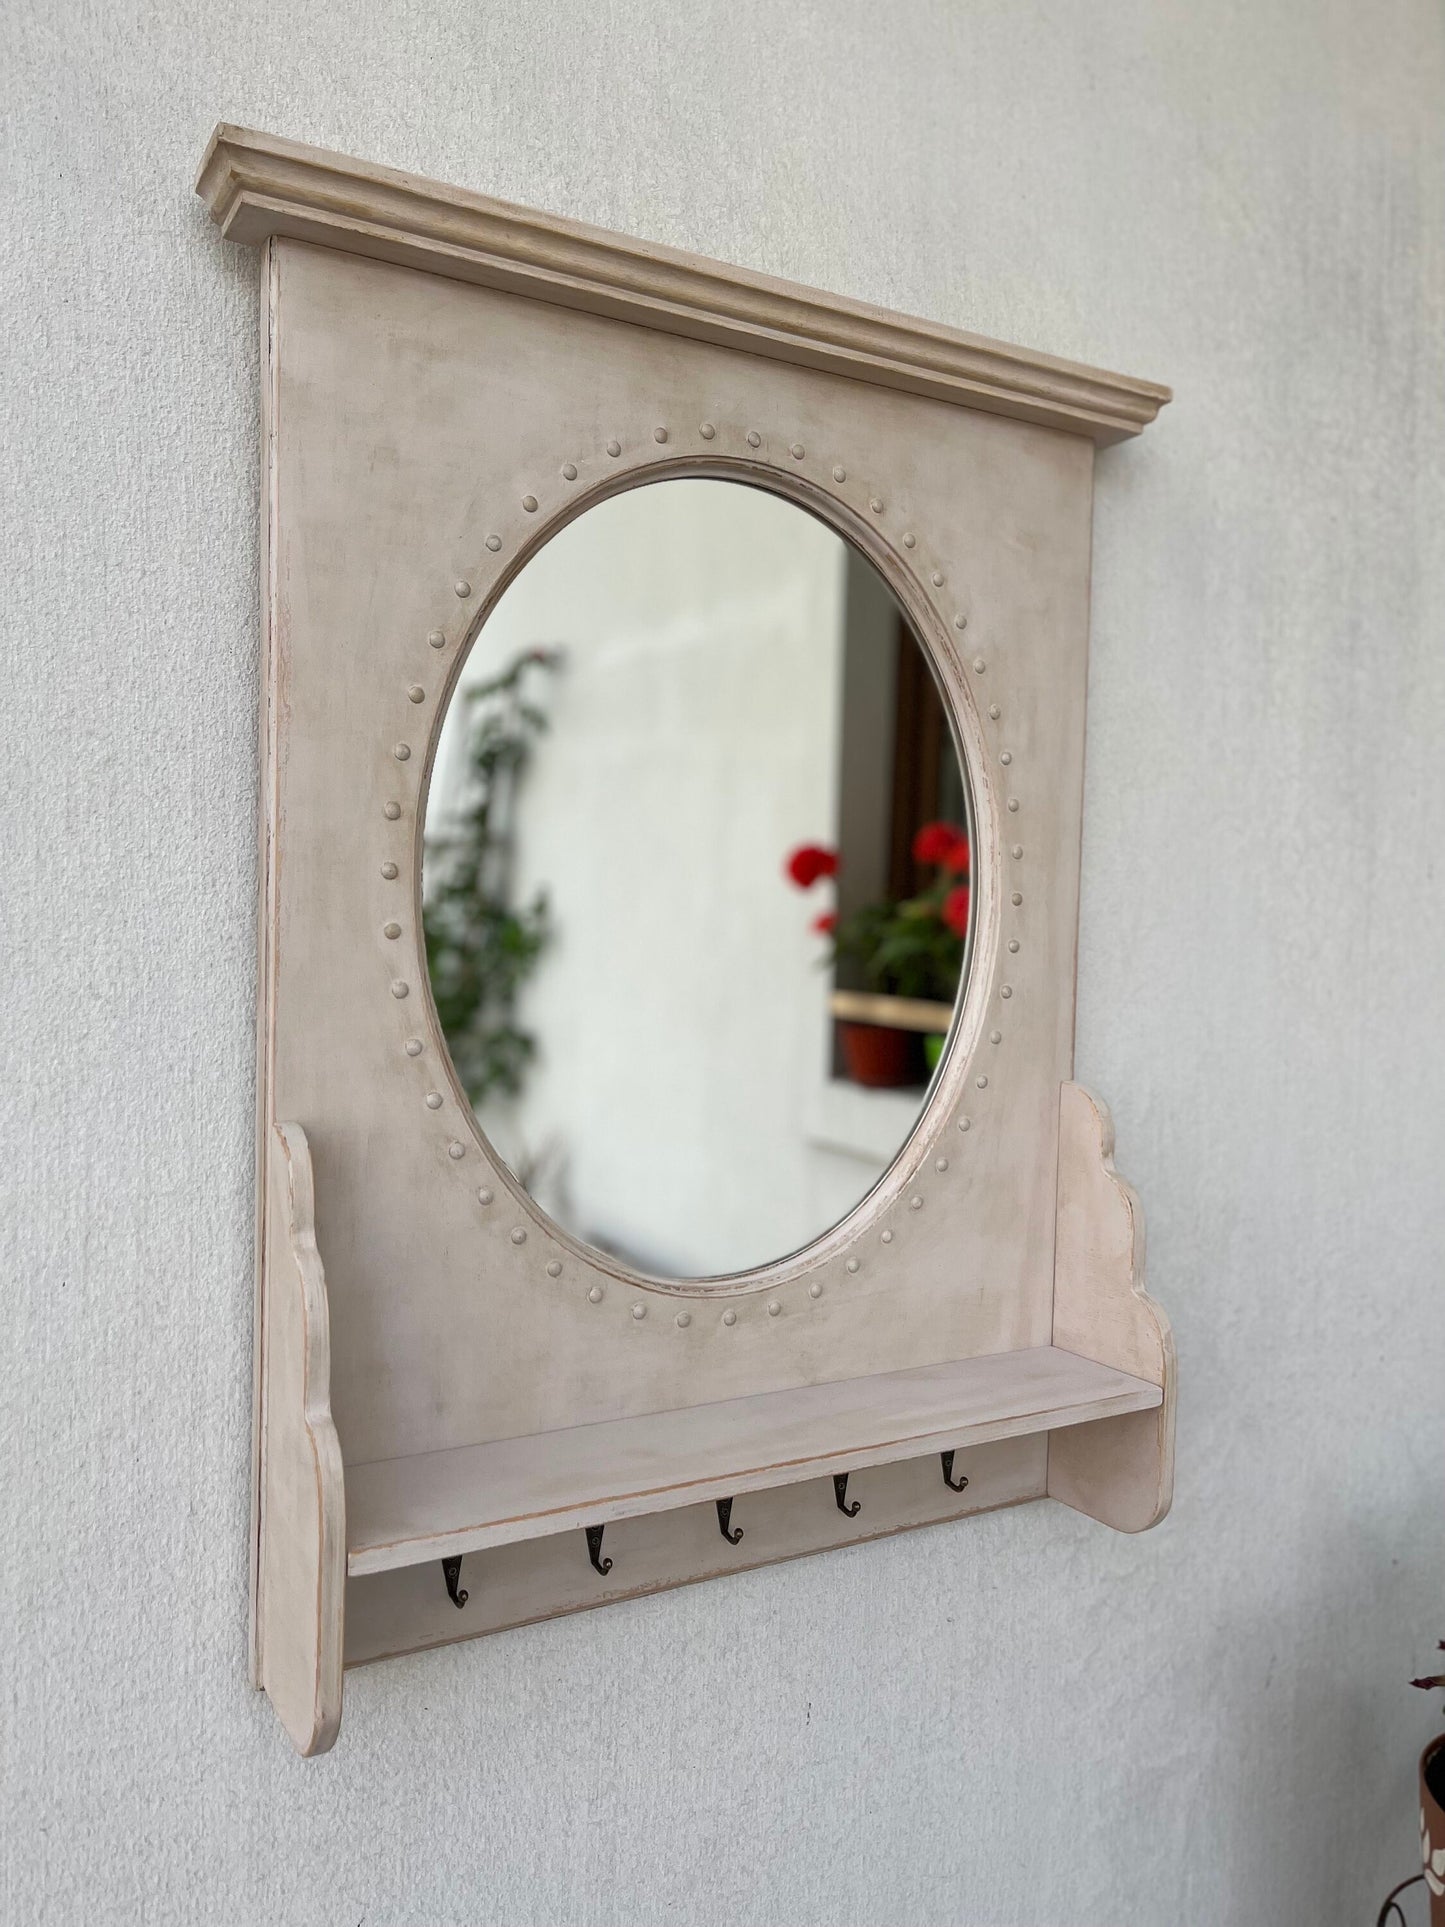 Handcrafted french wooden mirror with shelf, Vintage style wooden mirror, Large oval mirror with shelf, Rustic wood mirror with hooks